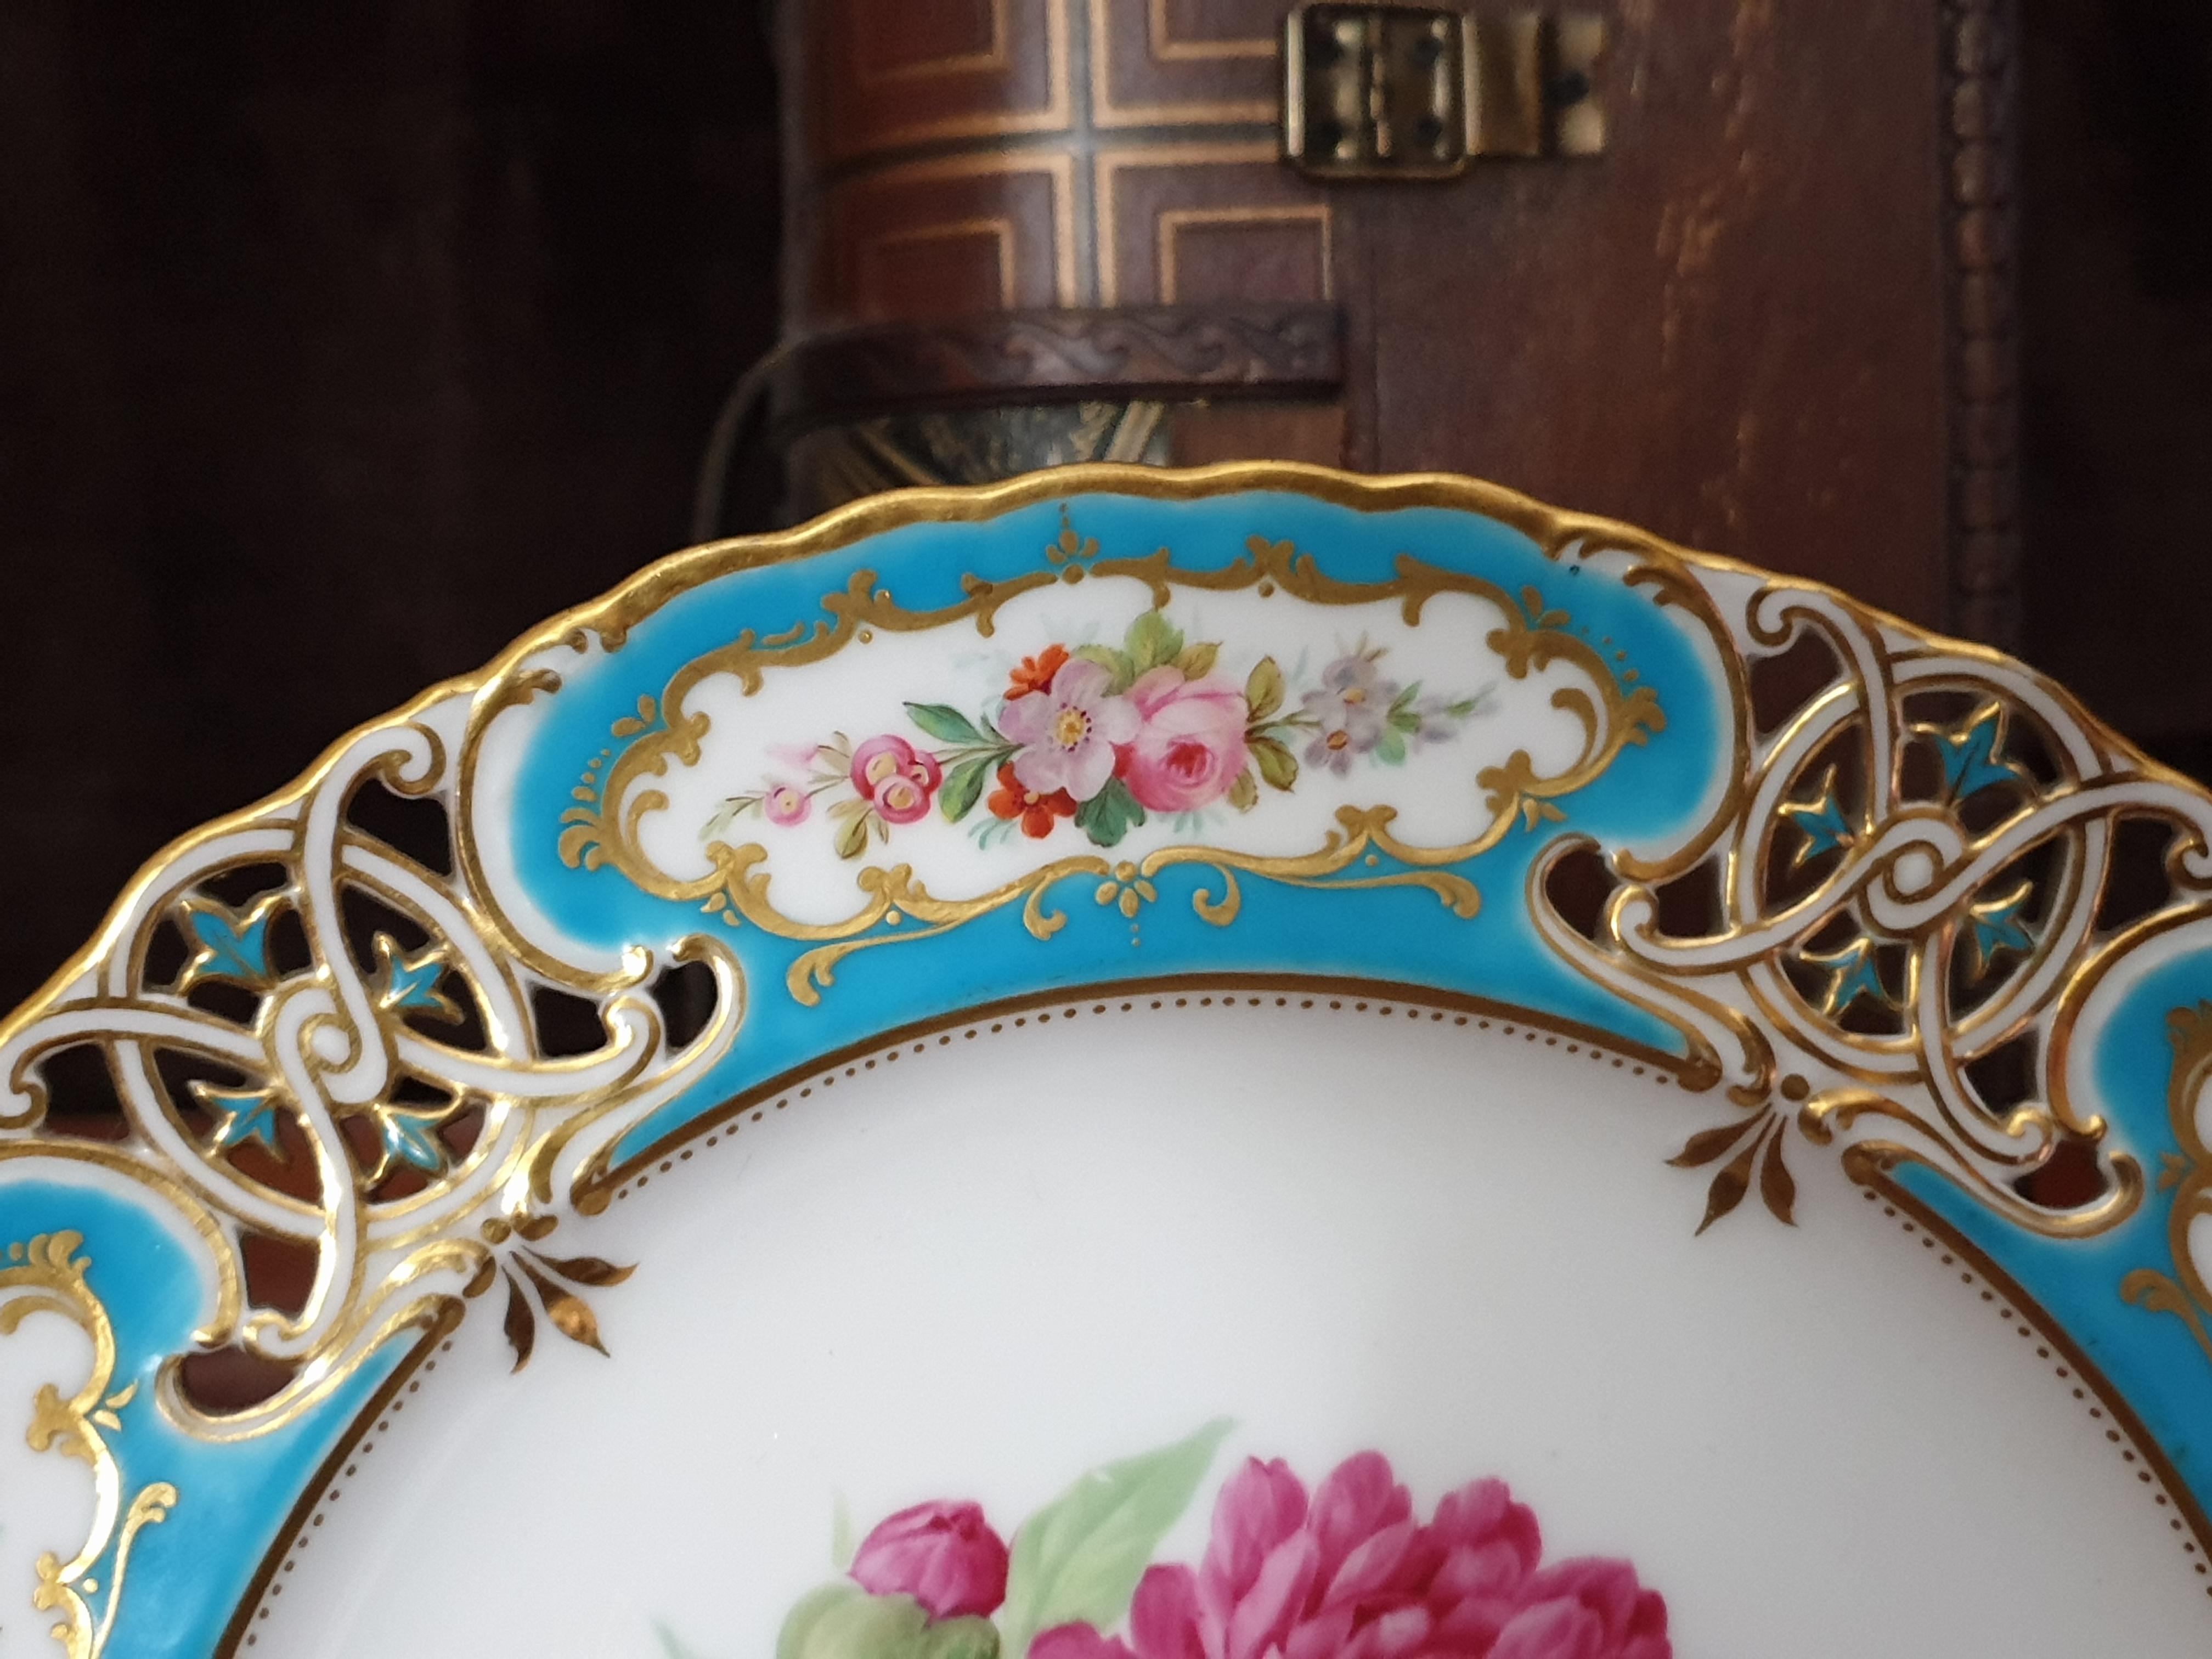 19th Century English Minton Reticulated Royal Arms Botanical Turquoise Dessert Service For Sale